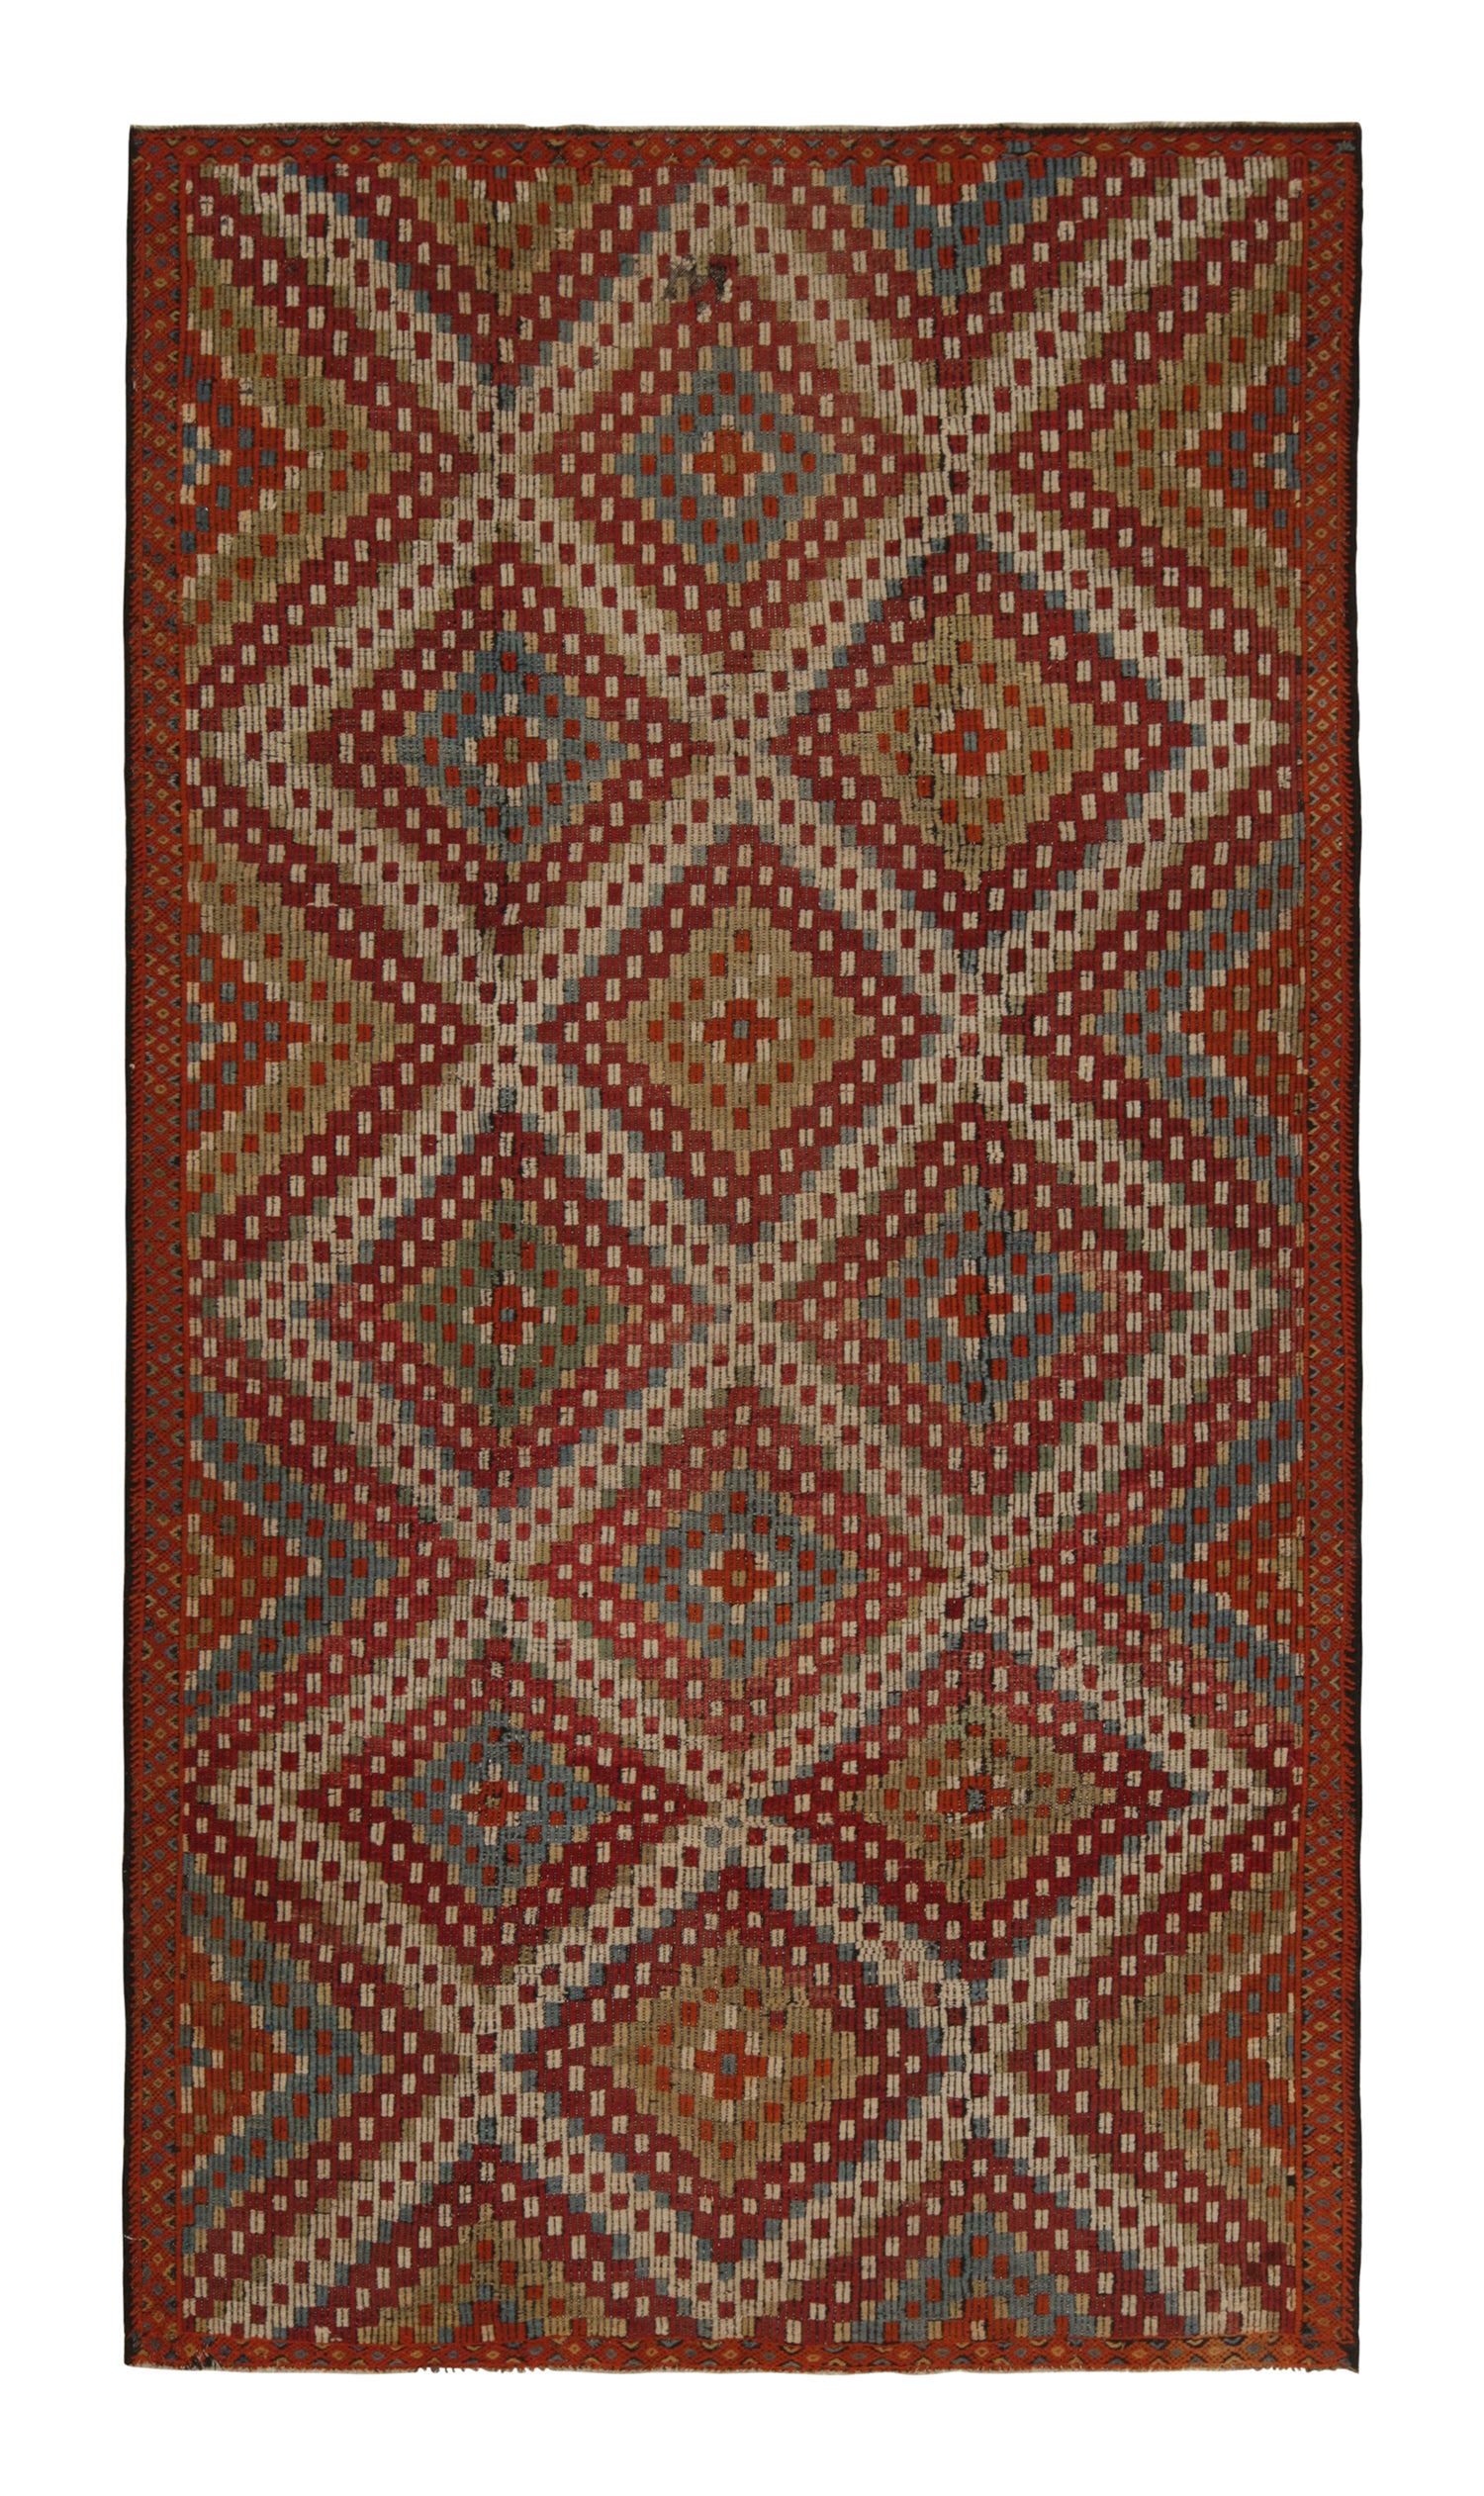 Vintage Chaput Style Kilim in Red Diamonds Blue and Green Accents by Rug & Kilim For Sale